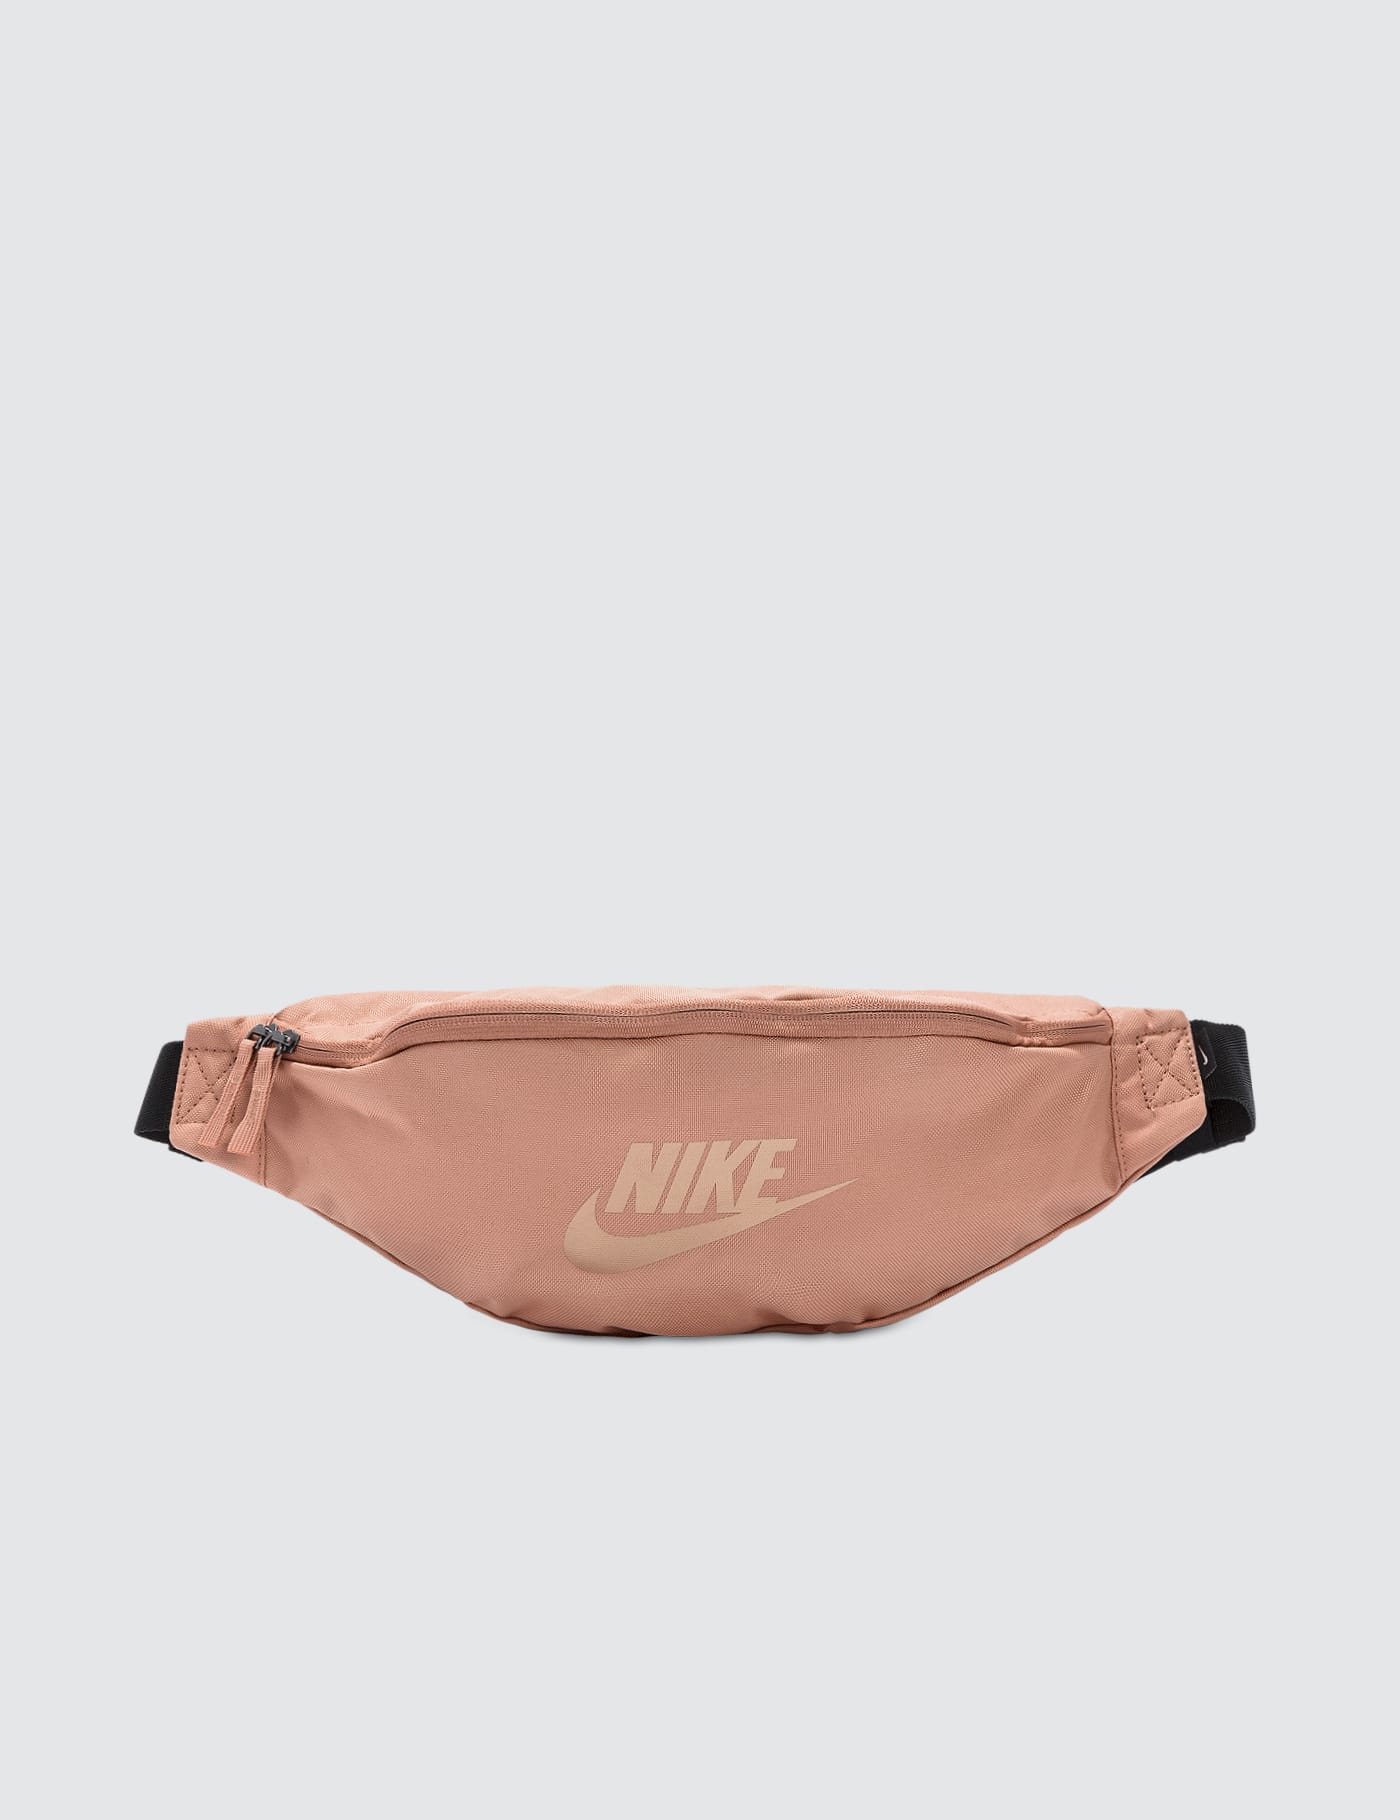 black and gold nike fanny pack